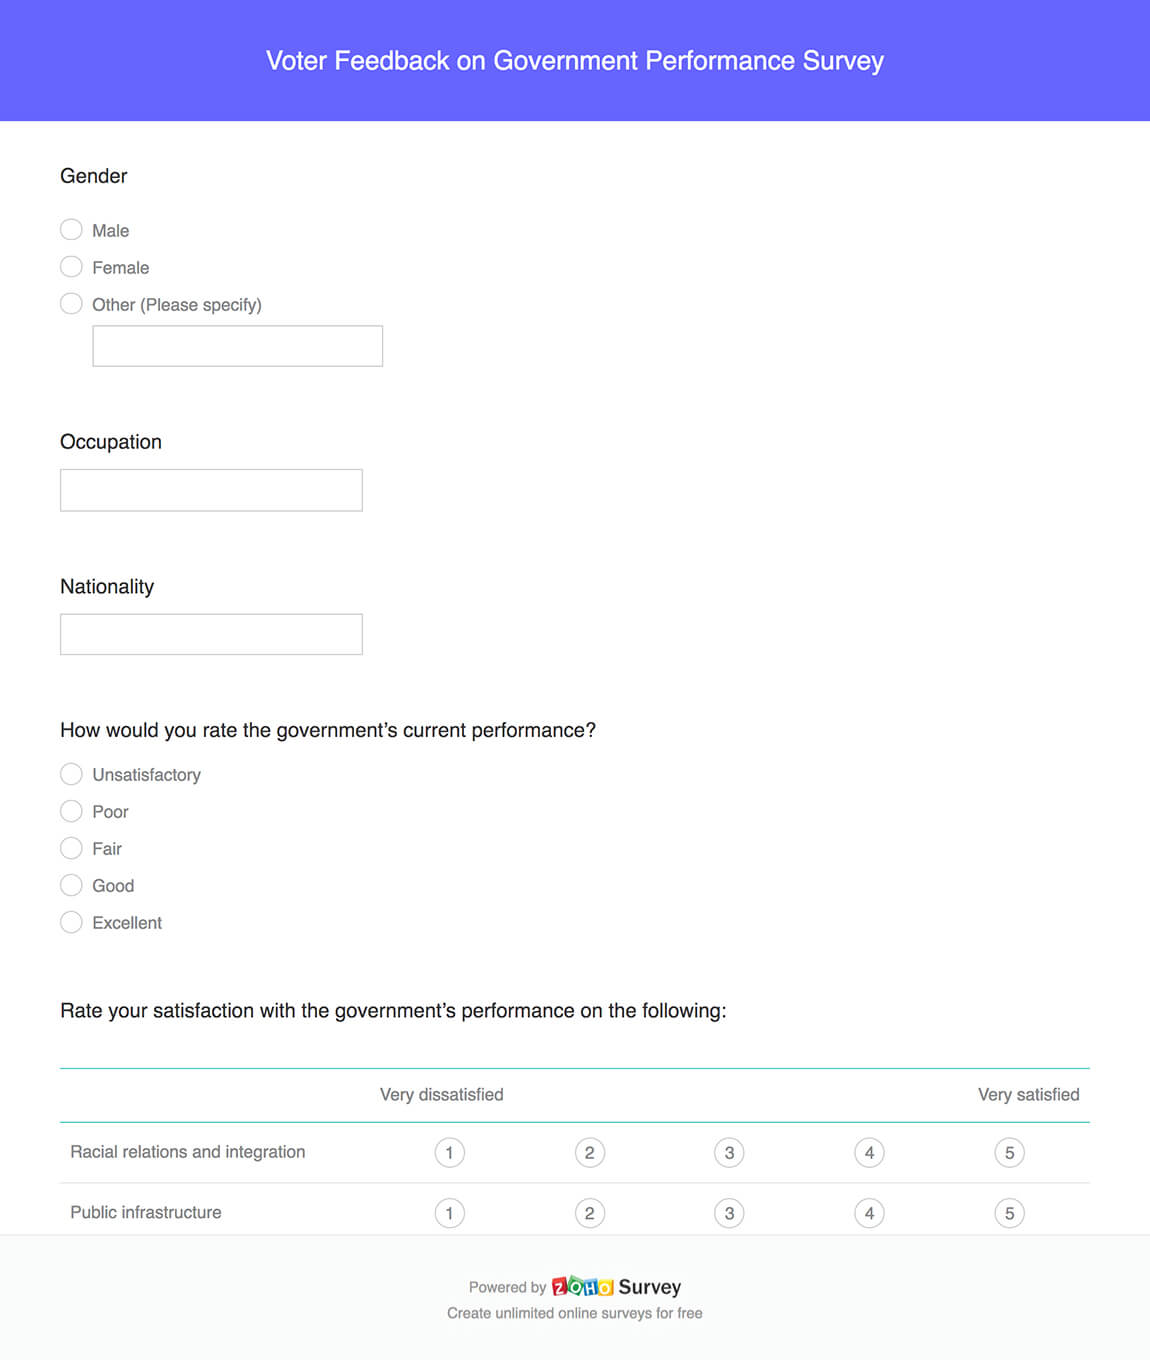 Voter feedback on government performance survey questionnaire template